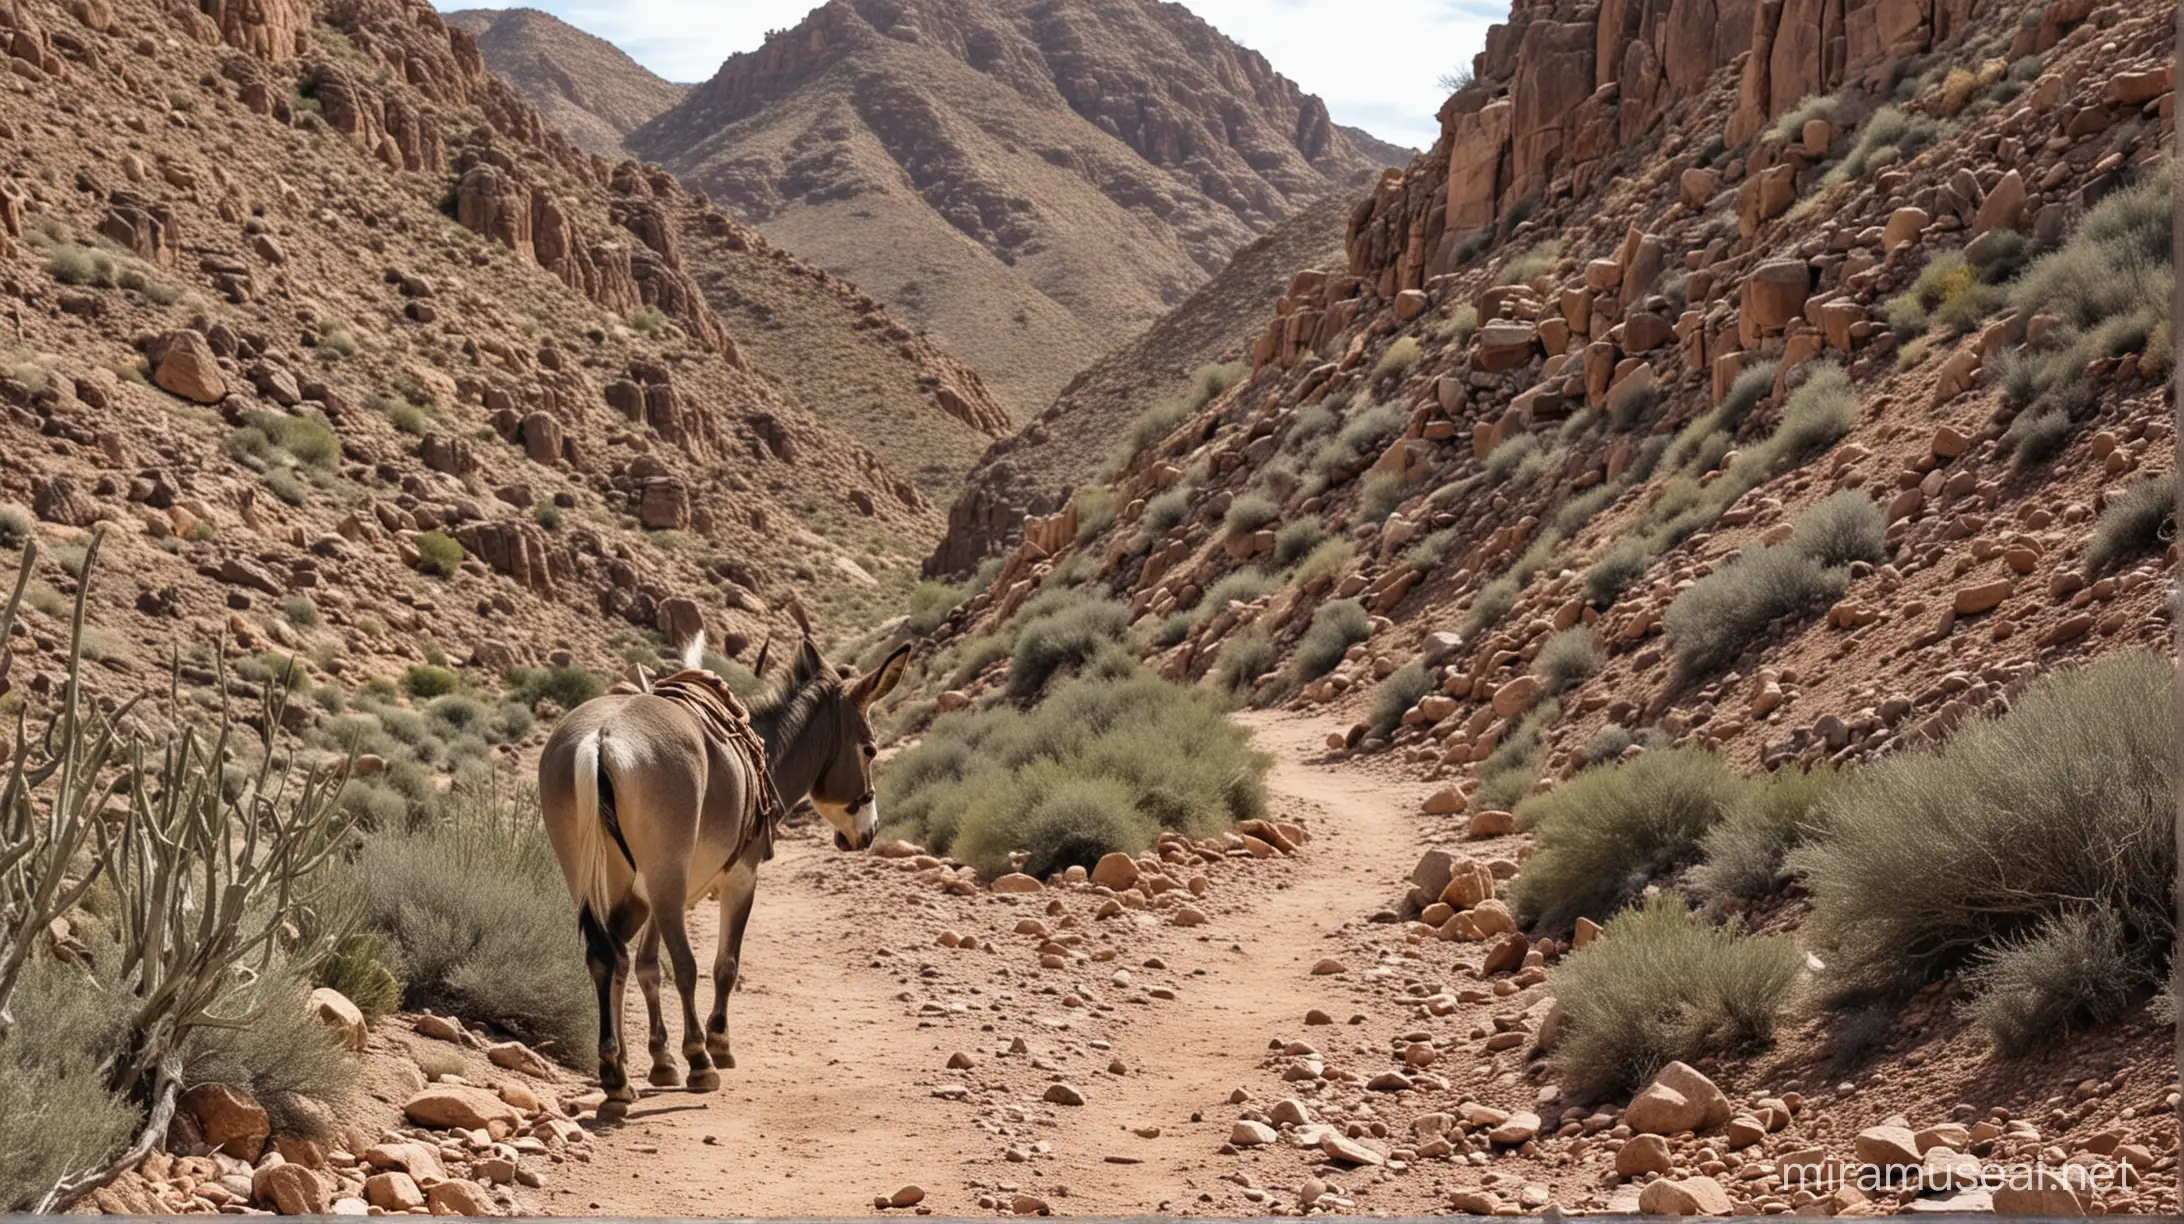 a donkey in the foreground, walking up a desert mountain trail